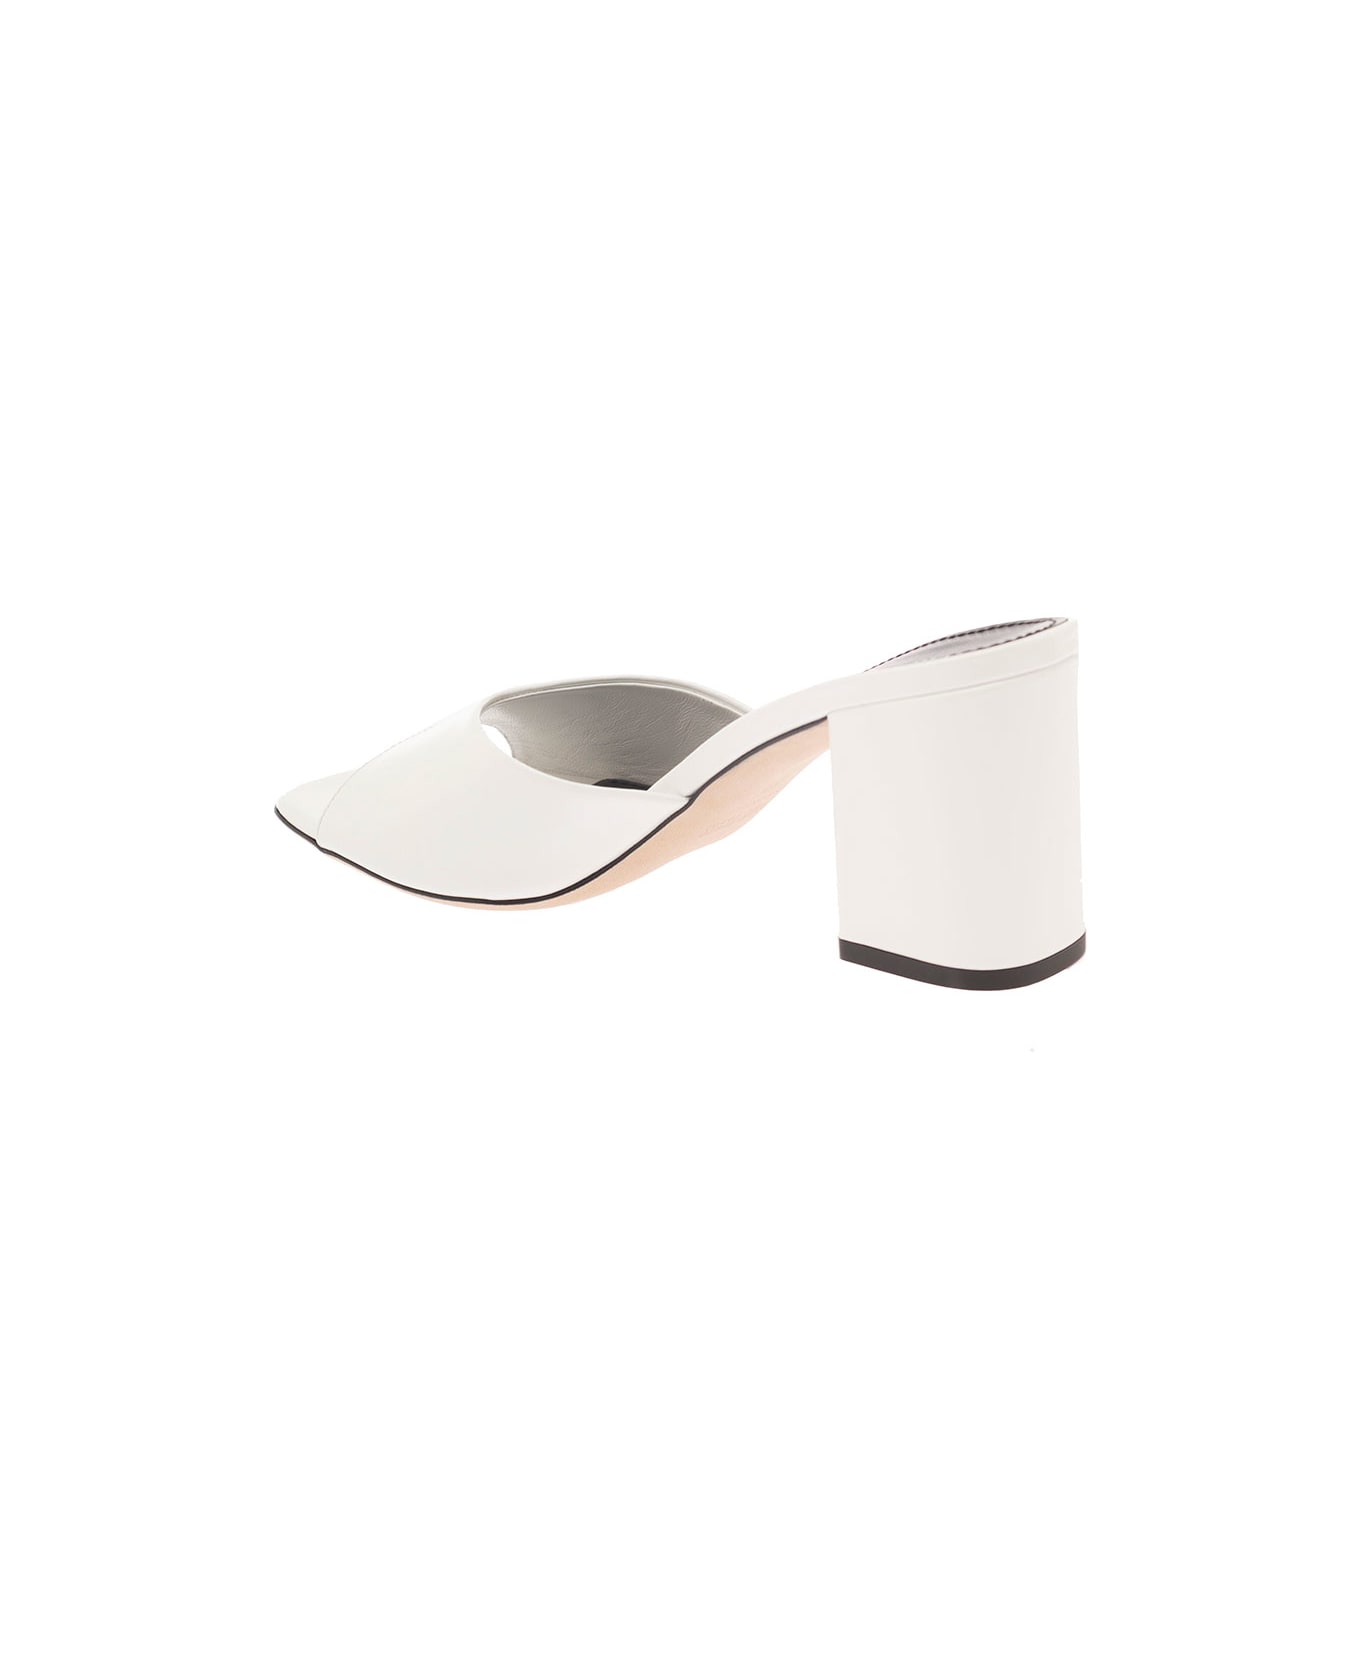 Paris Texas 'anja' White Mules With Block Heel In Patent Leather Woman - White